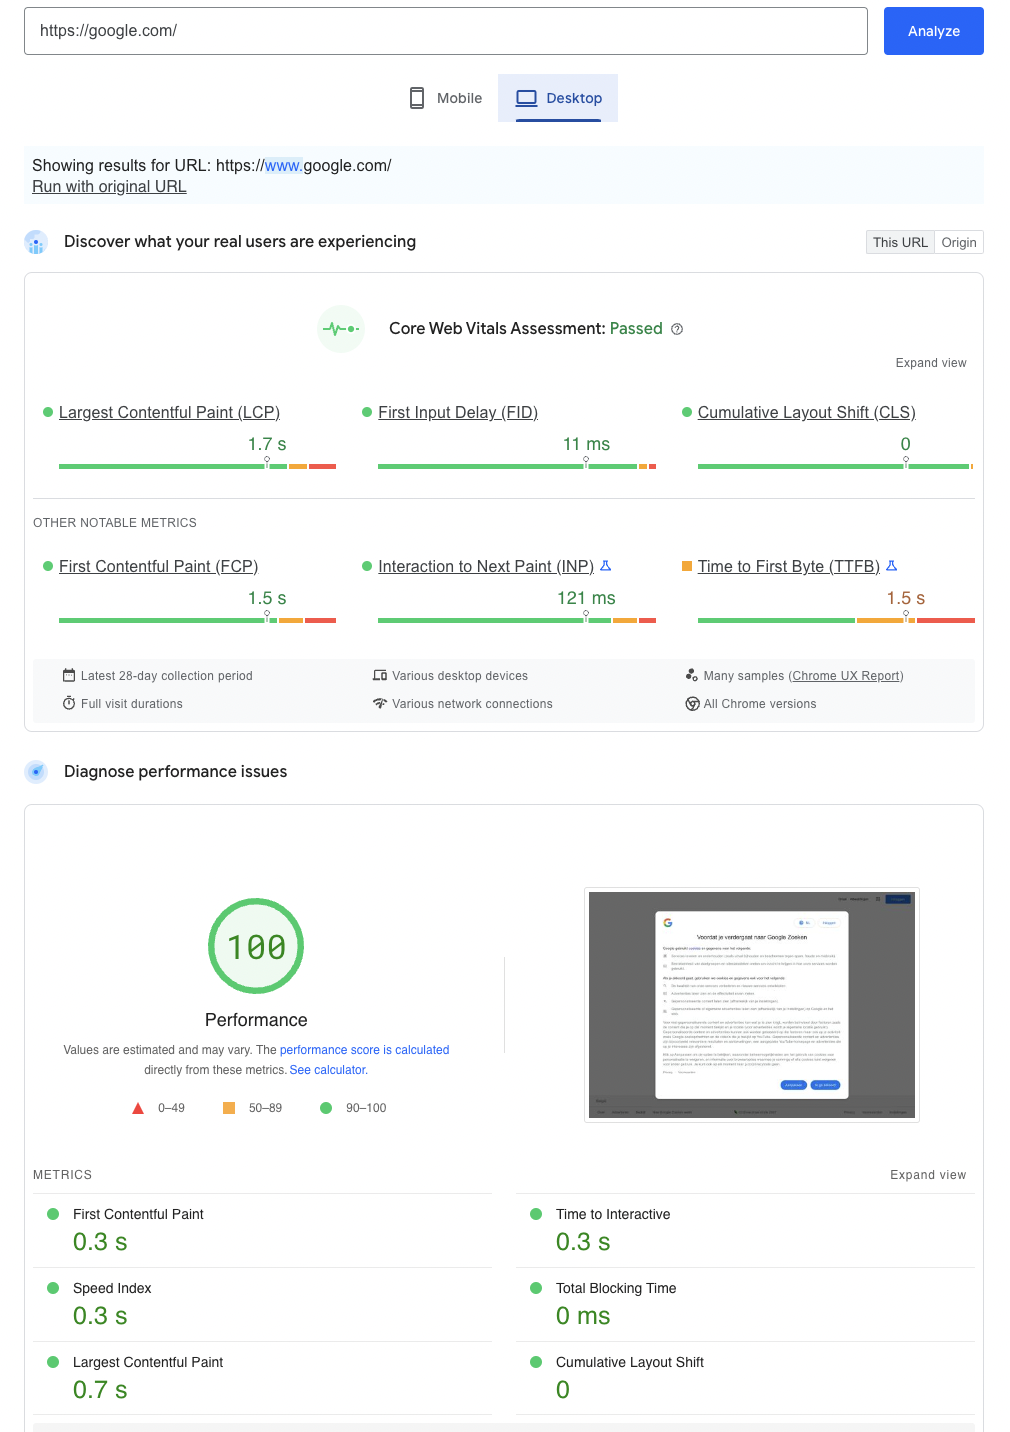 Screenshot of Google Page Speed Insights